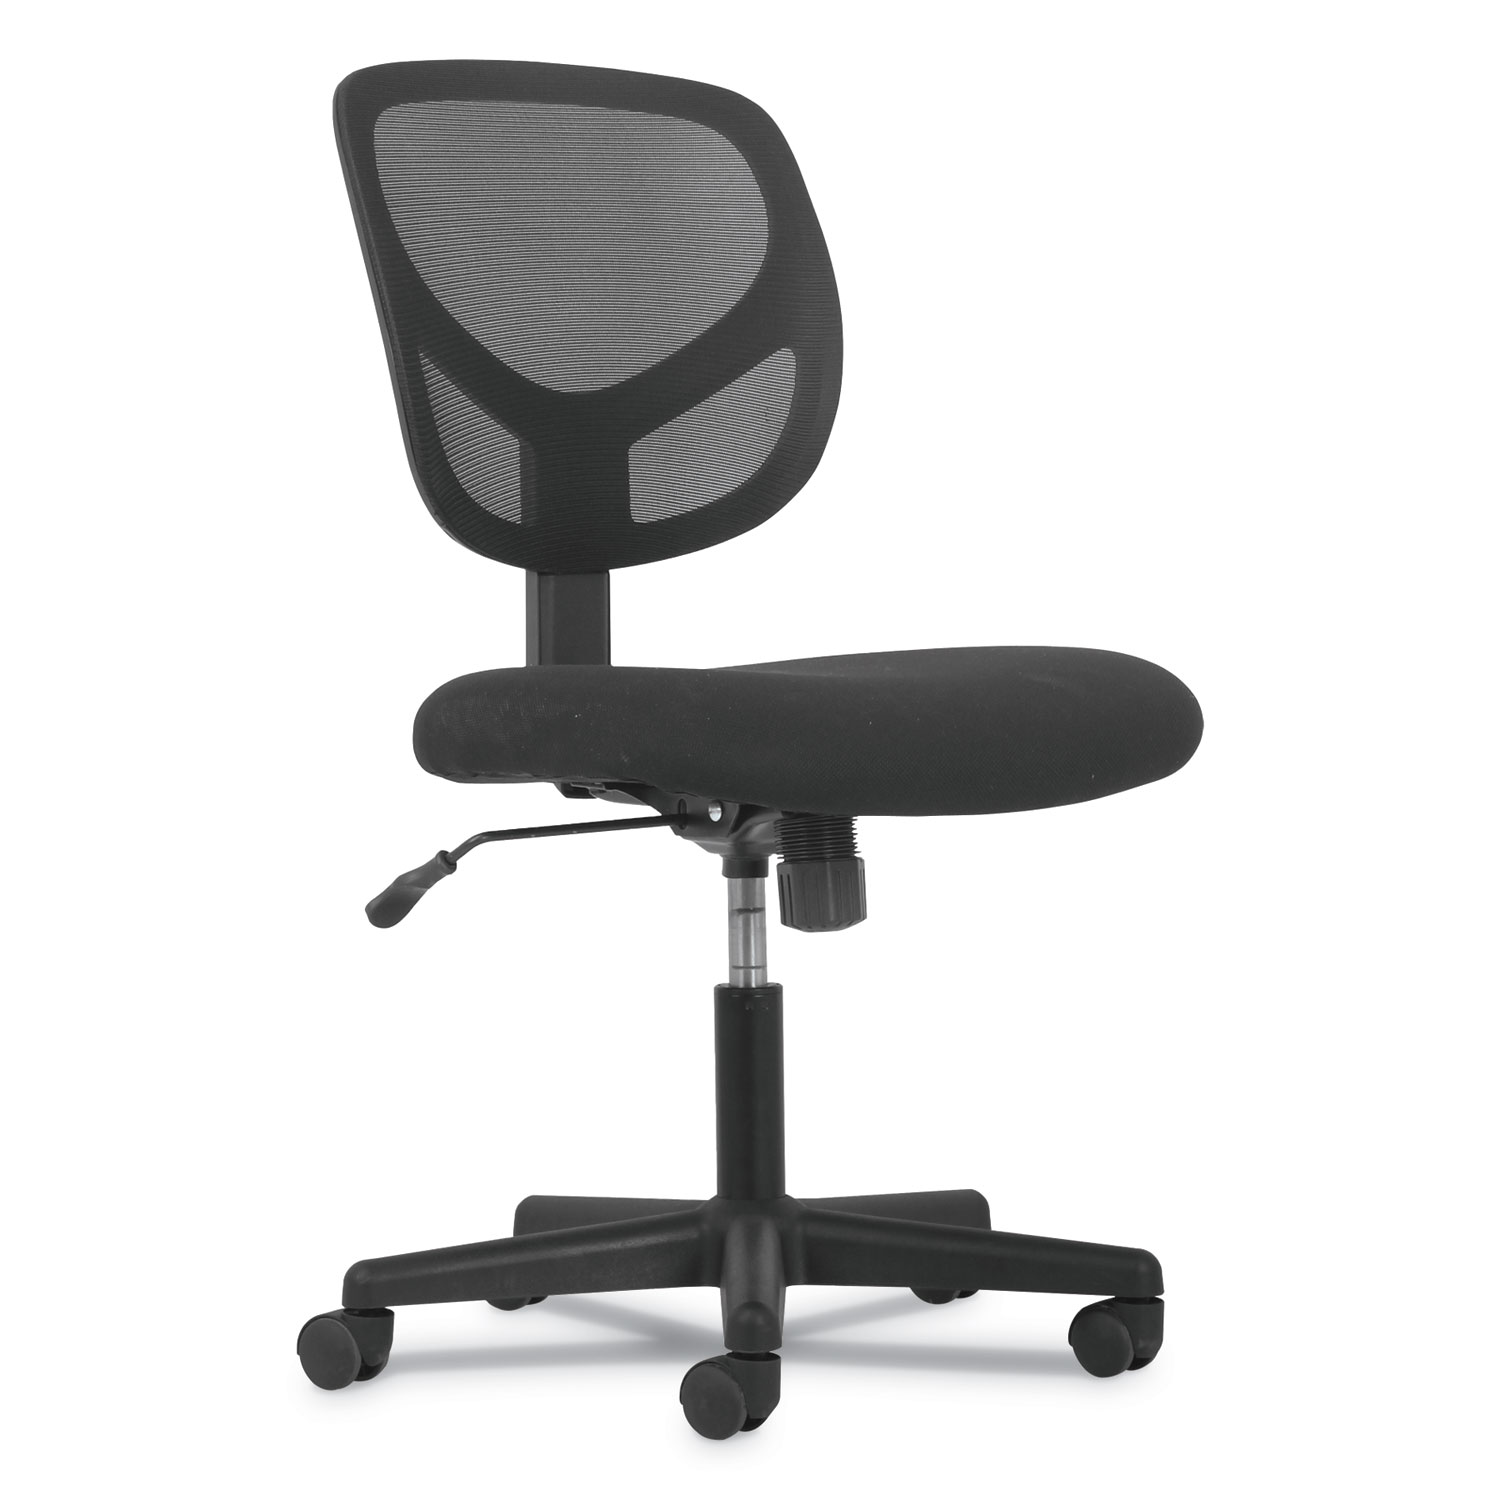  Sadie HVST101 1-Oh-One Mid-Back Task Chairs, Supports up to 250 lbs., Black Seat/Black Back, Black Base (BSXVST101) 